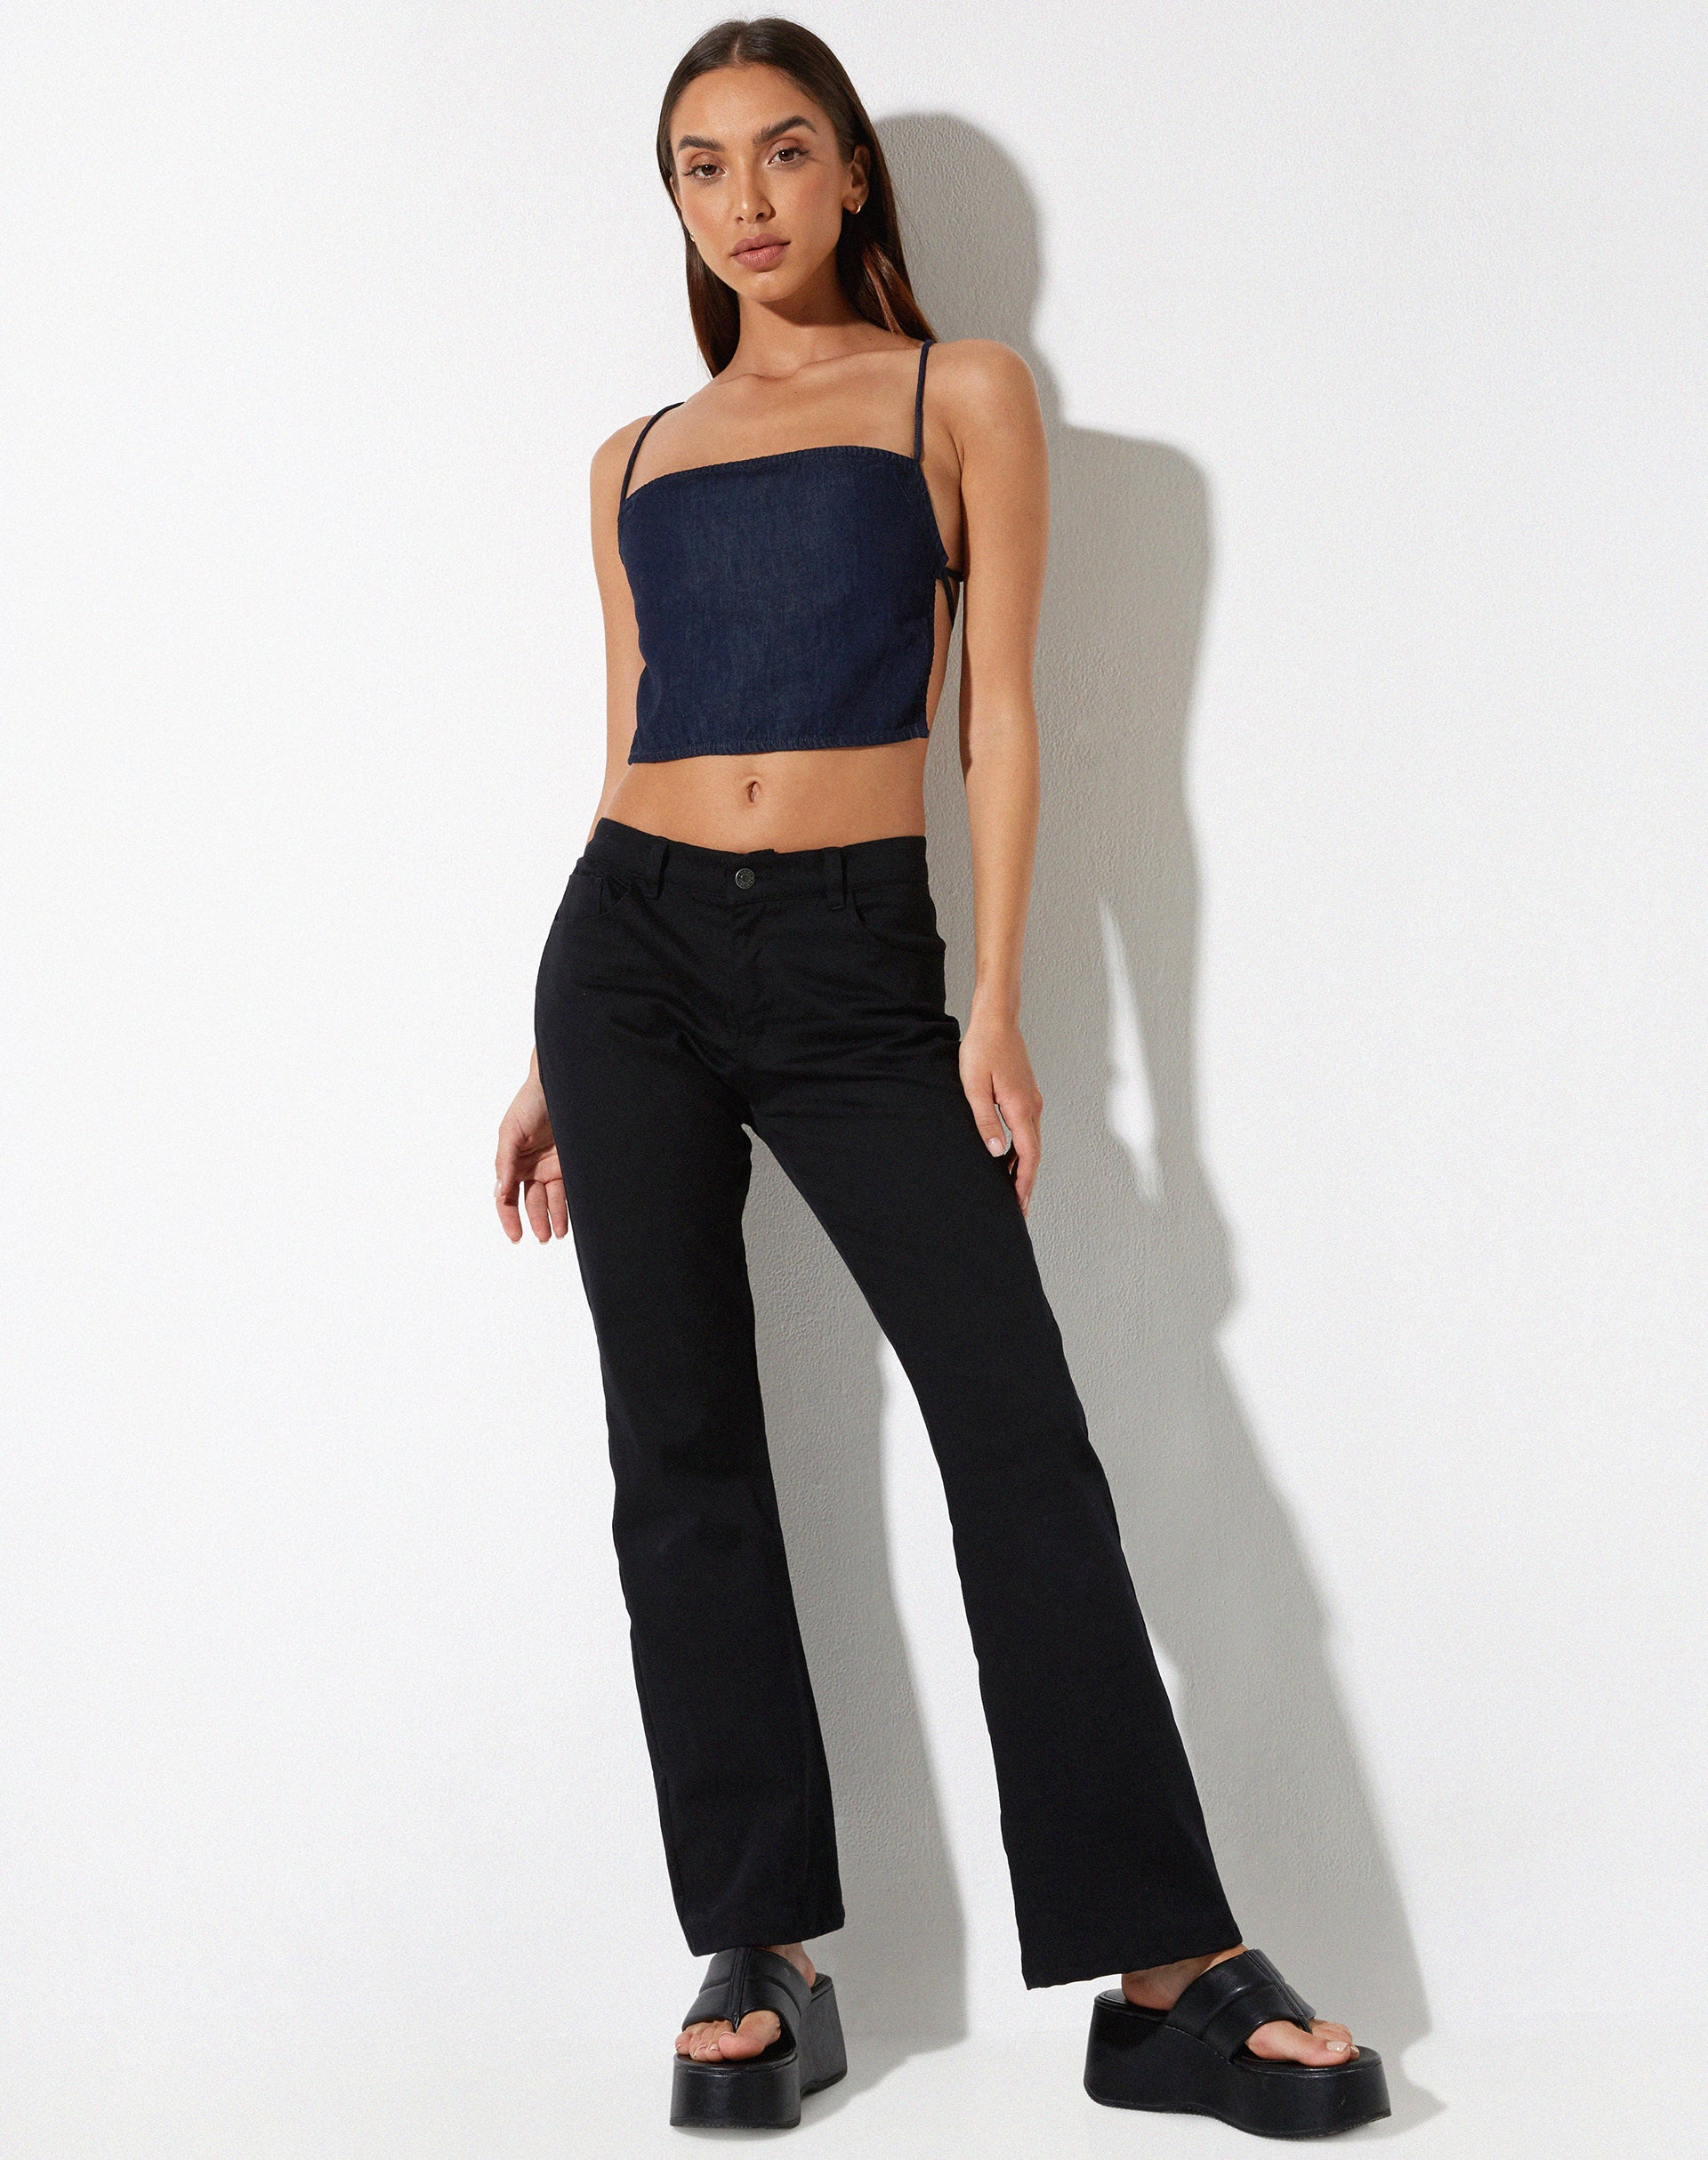 image of Rosta Crop Top in Denim Blue Chambray